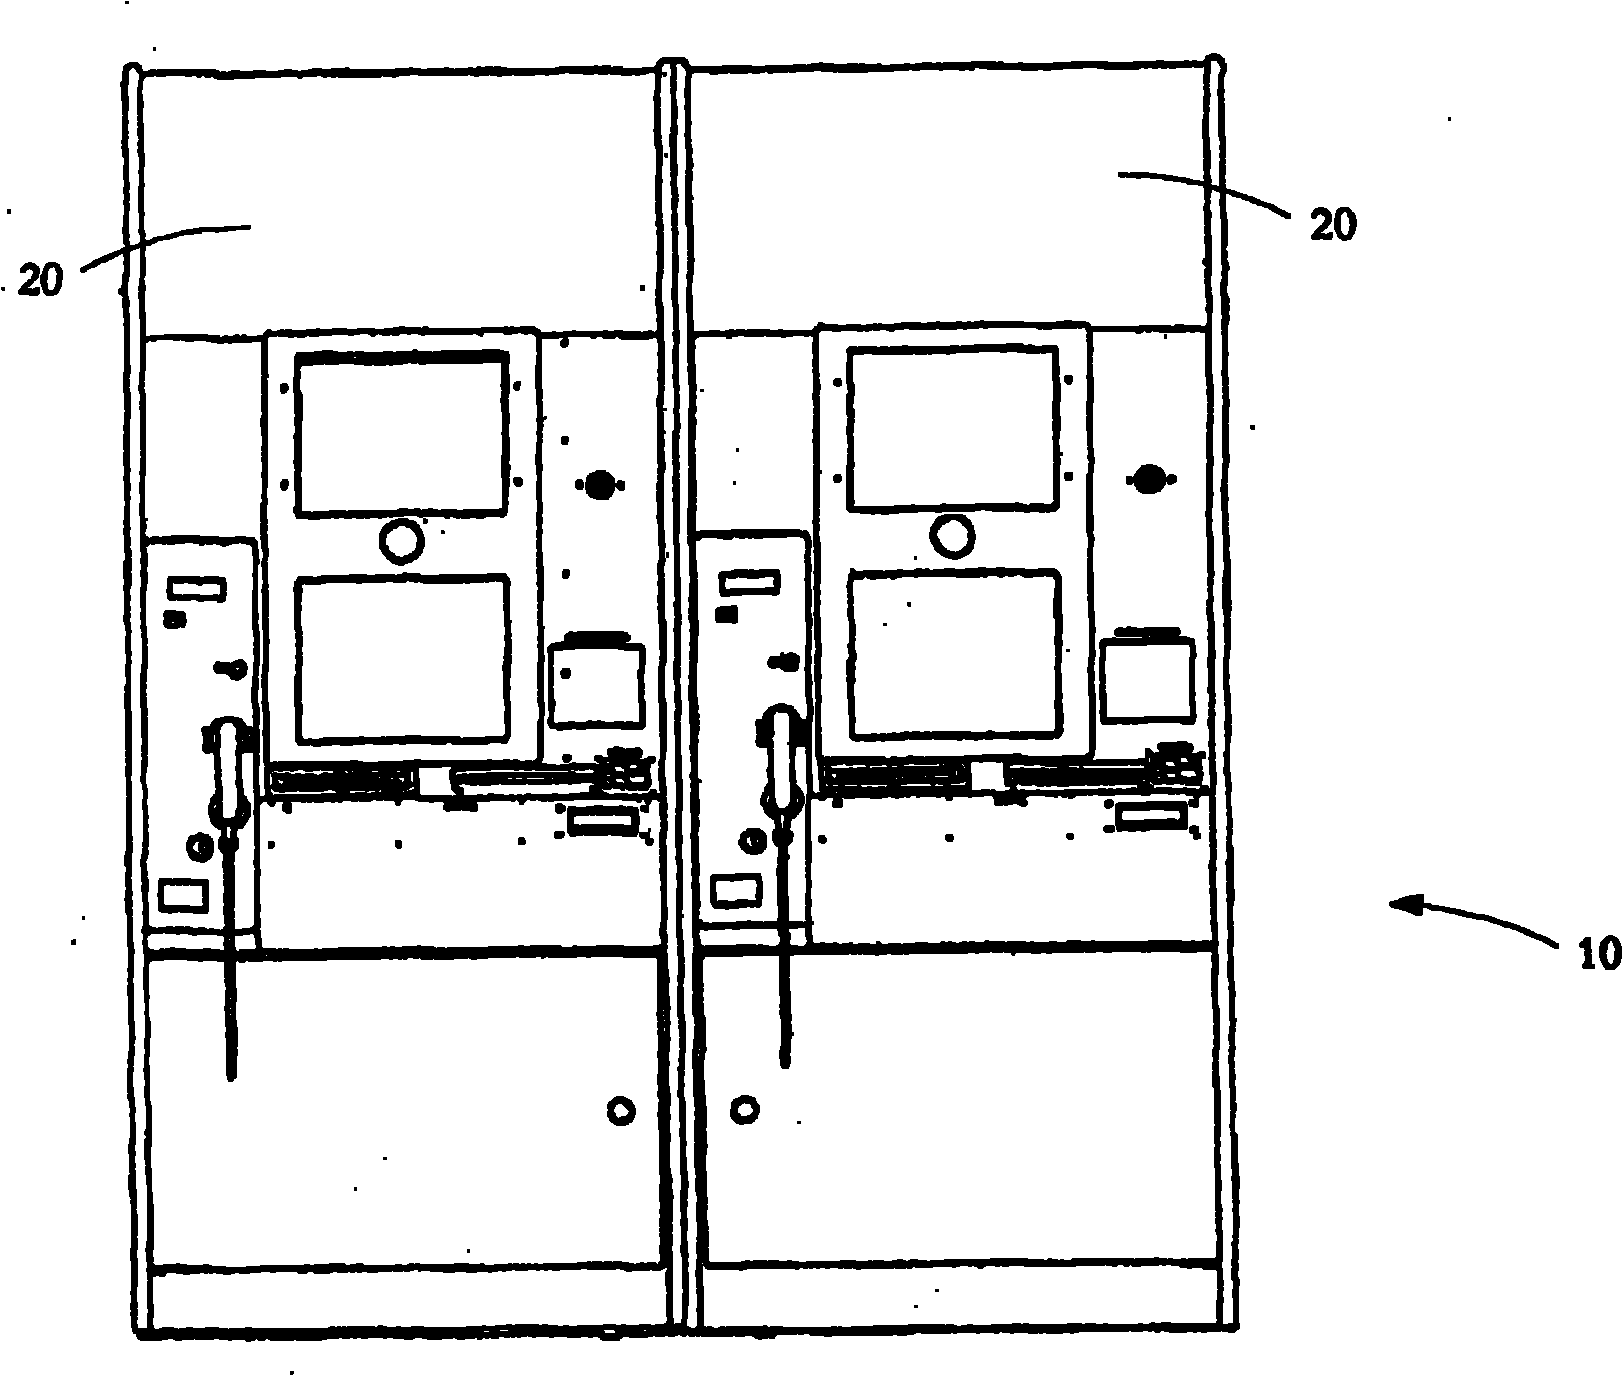 Automated apparatus for dispensing medicaments